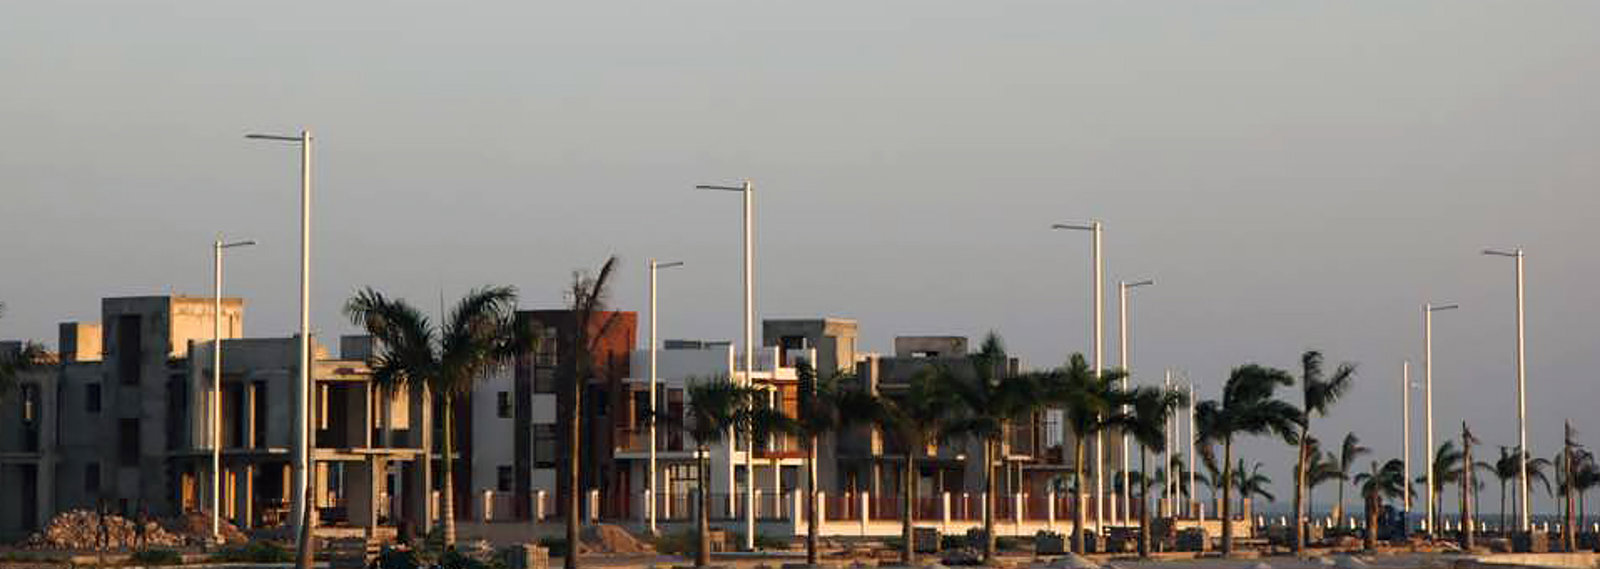 residential buildings, light poles and palms